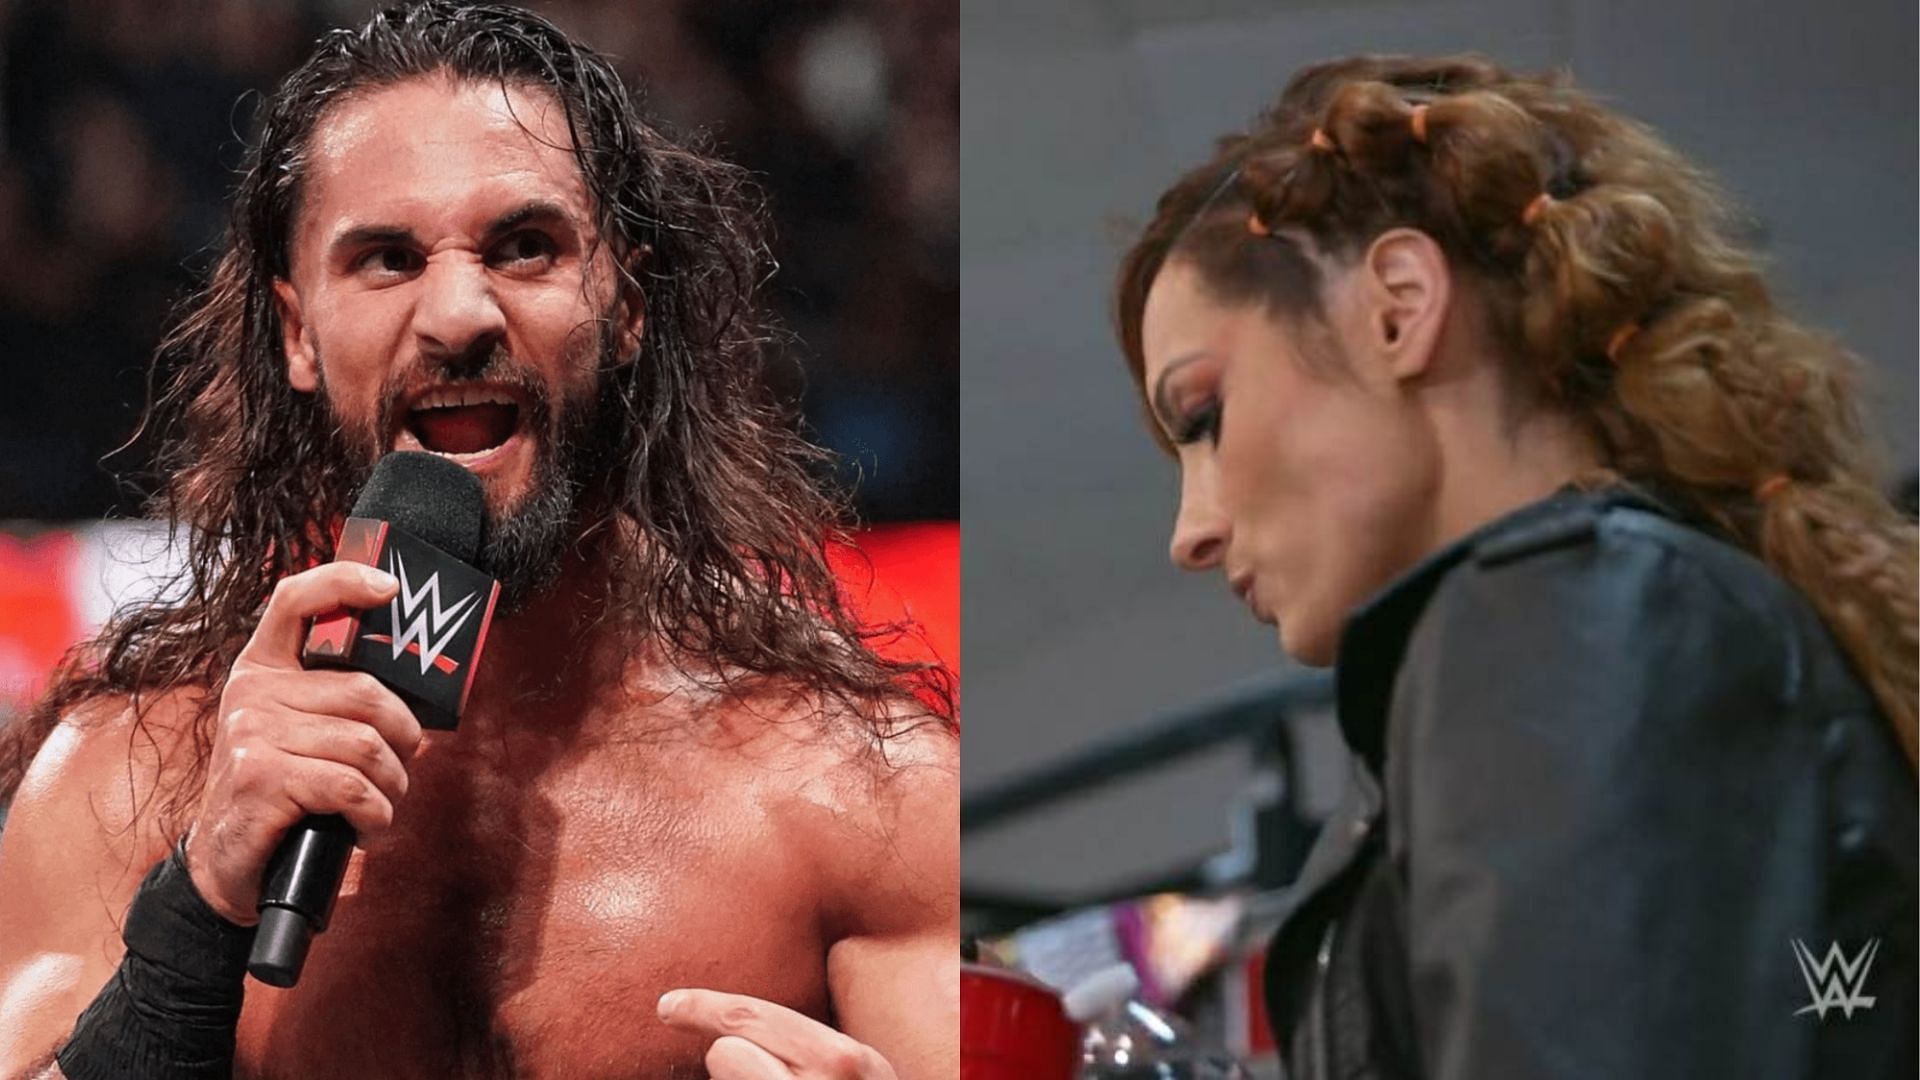 Becky Lynch was seen interacting with one of Seth Rollins